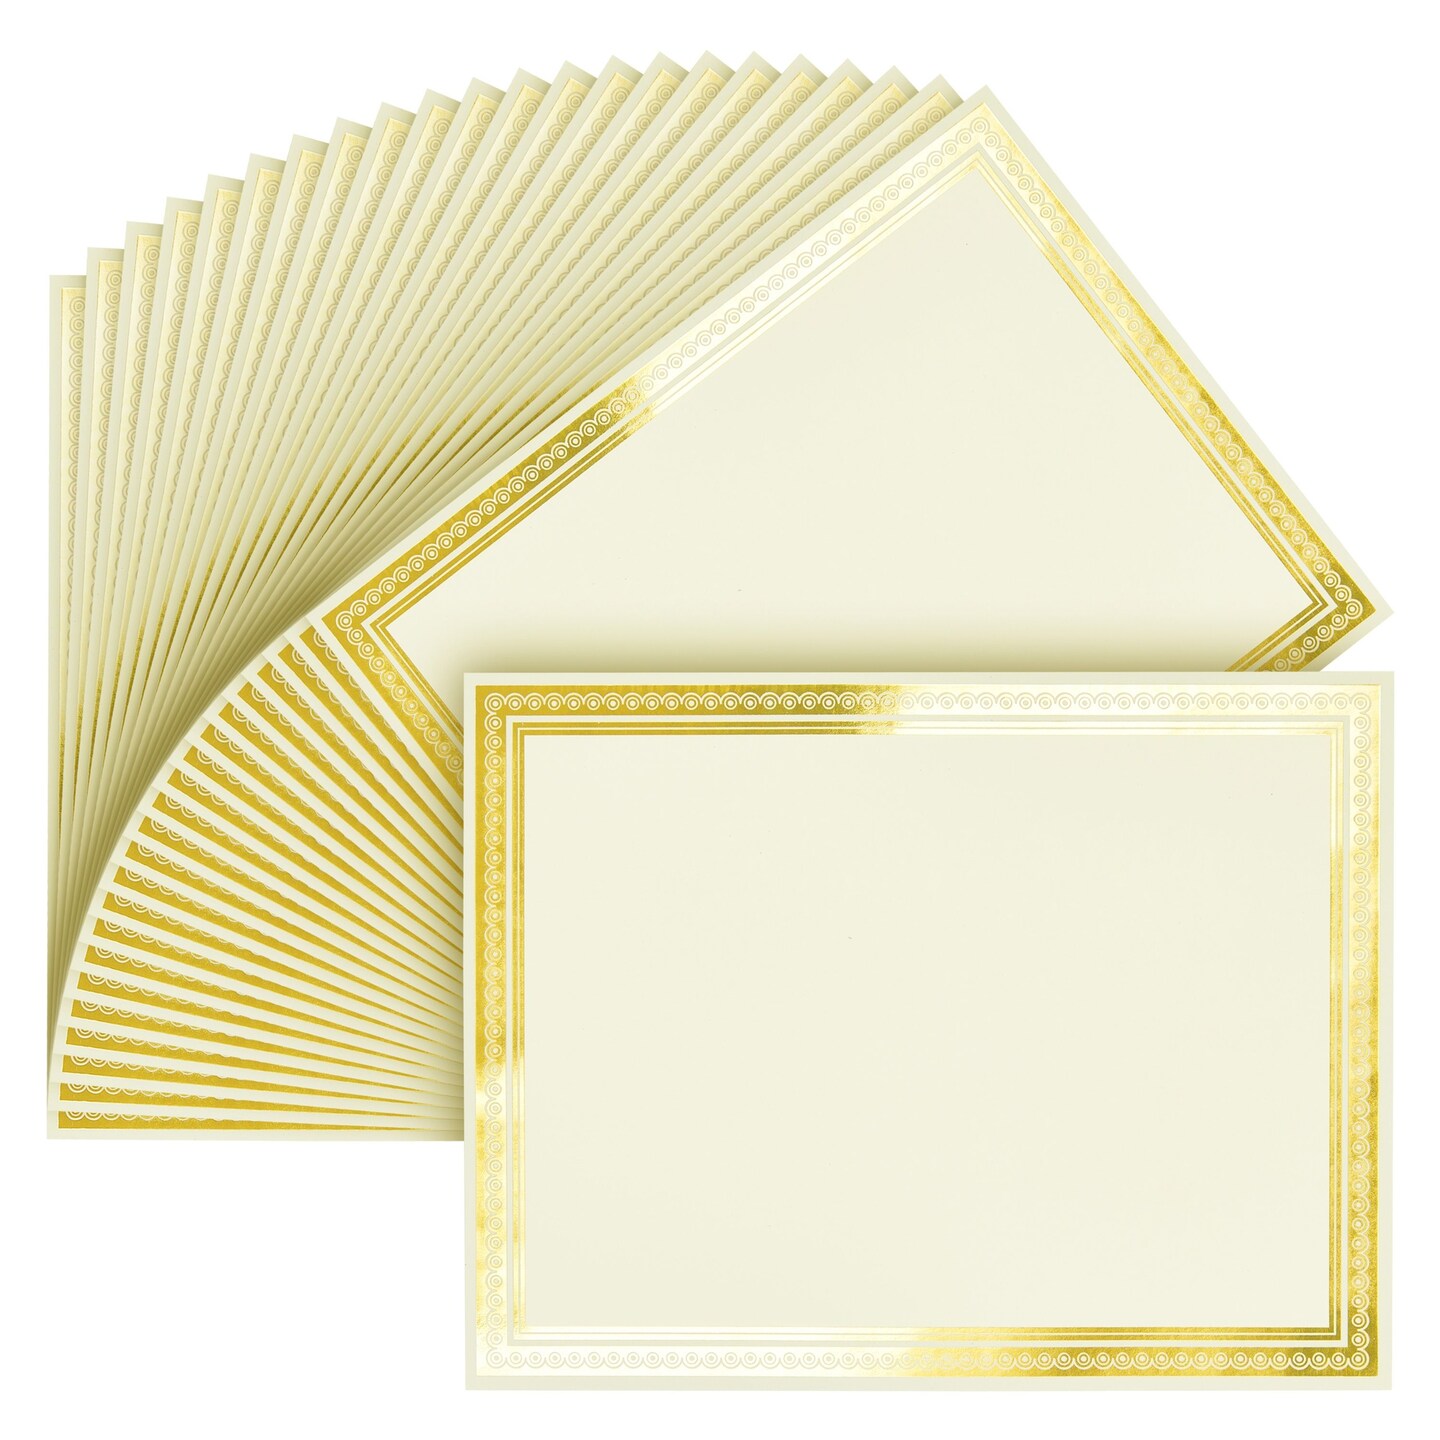 50 Sheets Gold Foil Certificate Paper for Printing - Customizable Blank  Cardstock with Border for Graduation Diploma, Achievement Awards,  Recognition